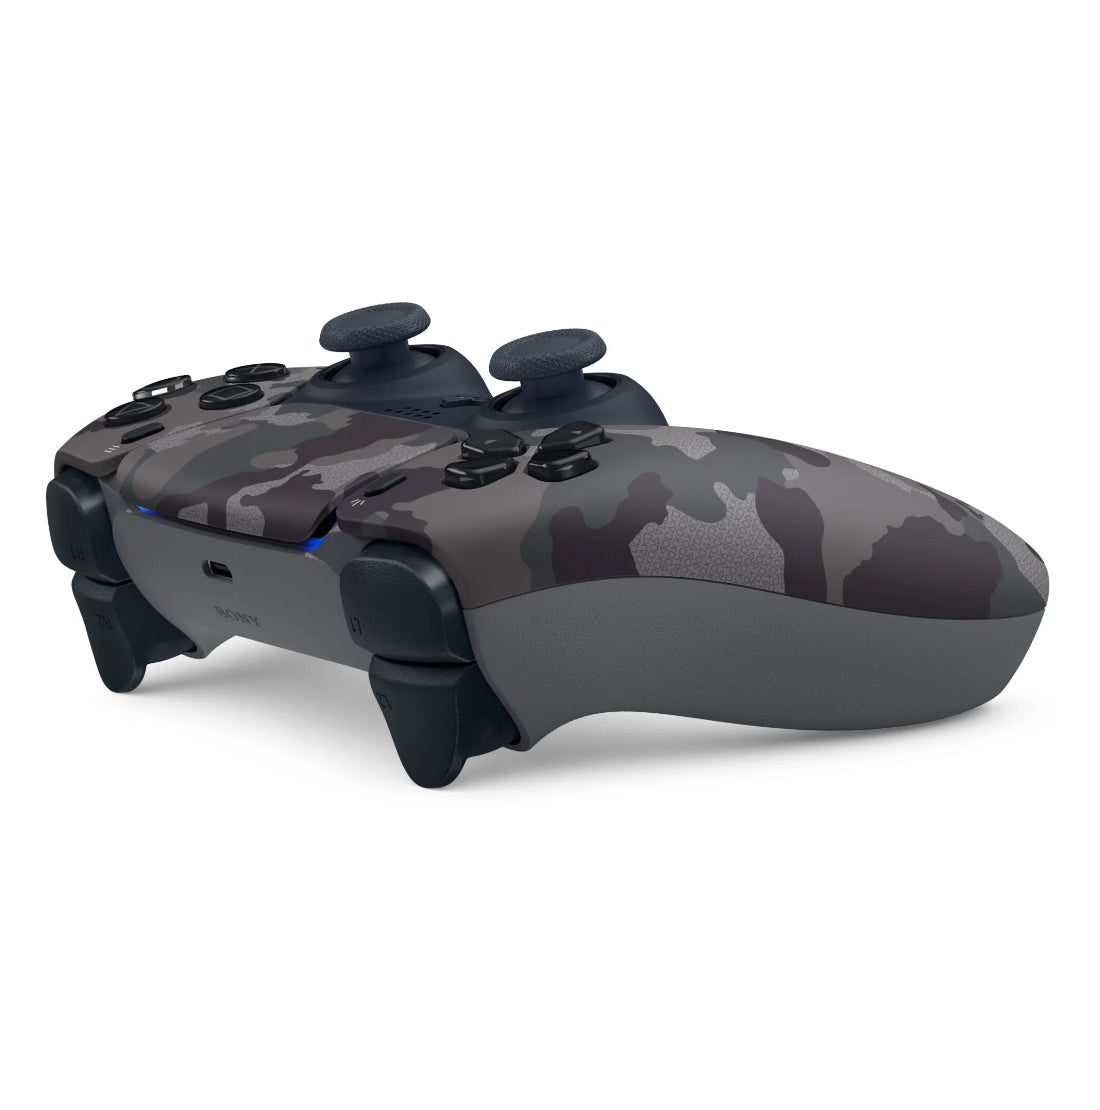 Sony Playstation 5 Disc Edition with Extra Gray Camo Controller and Starter Pack Kit Bundle - Pro-Distributing